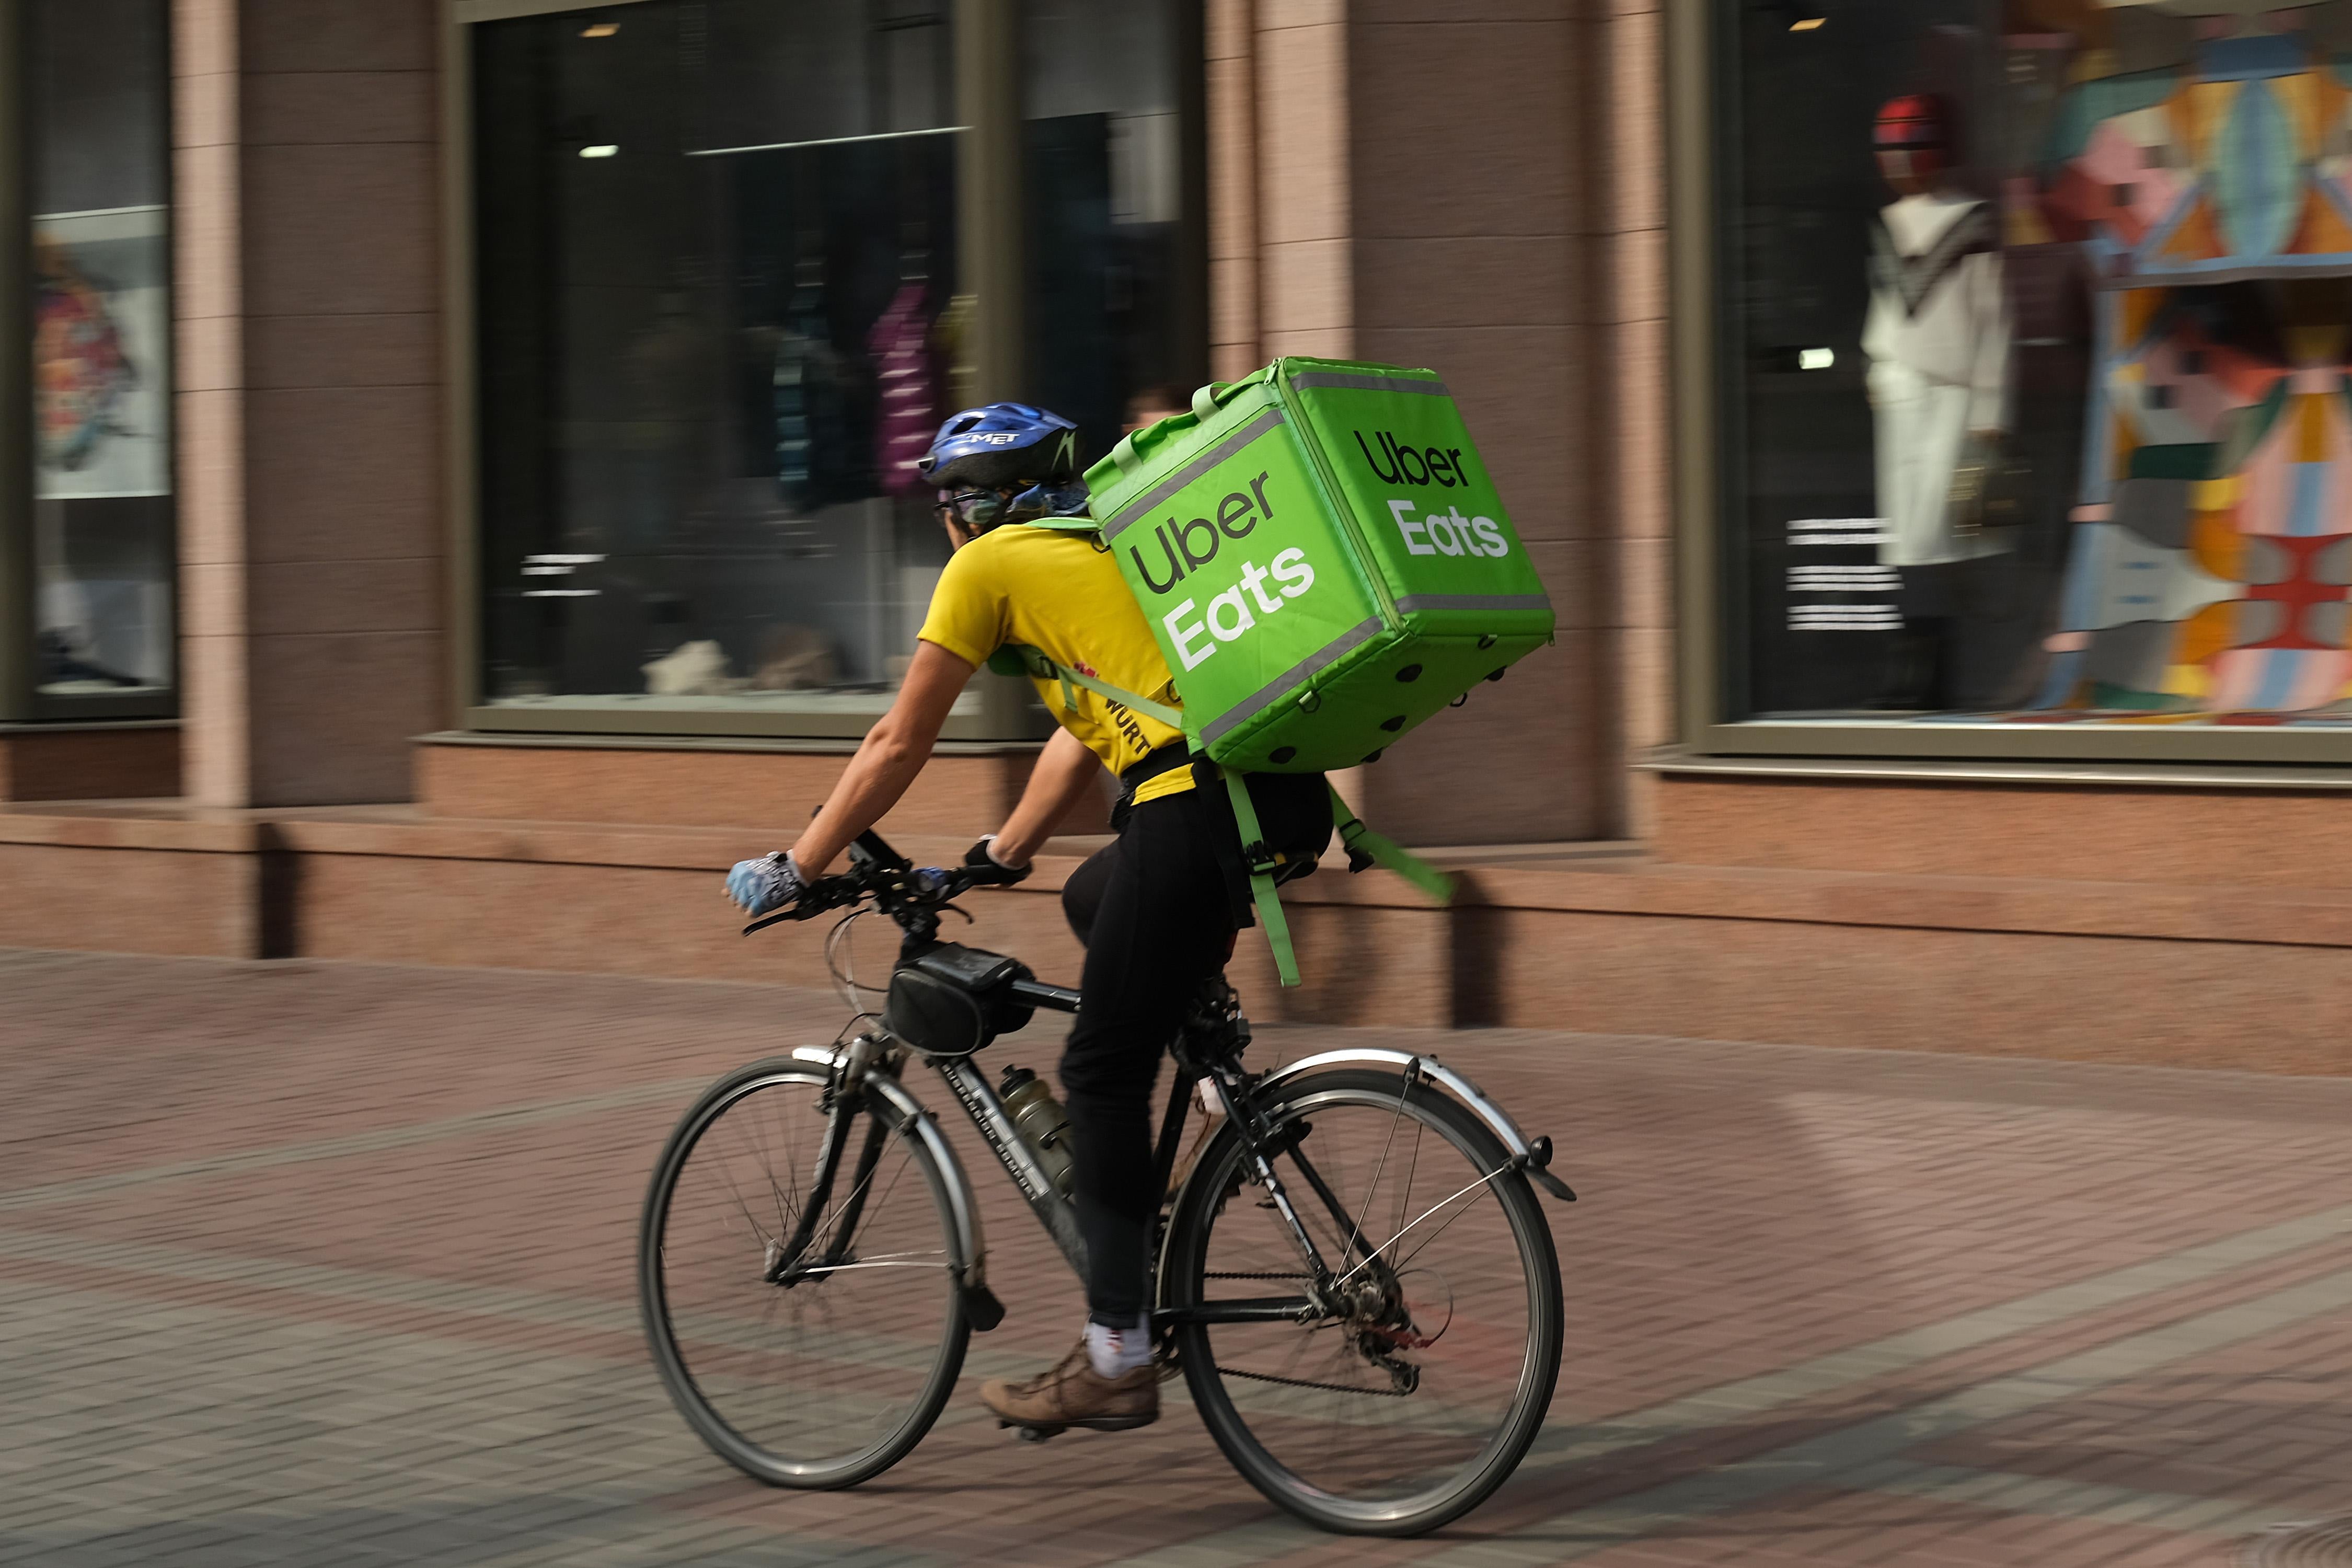 A man wearing a yellow shirt rides a bike past storefronts. On his back is a green Uber Eats container.